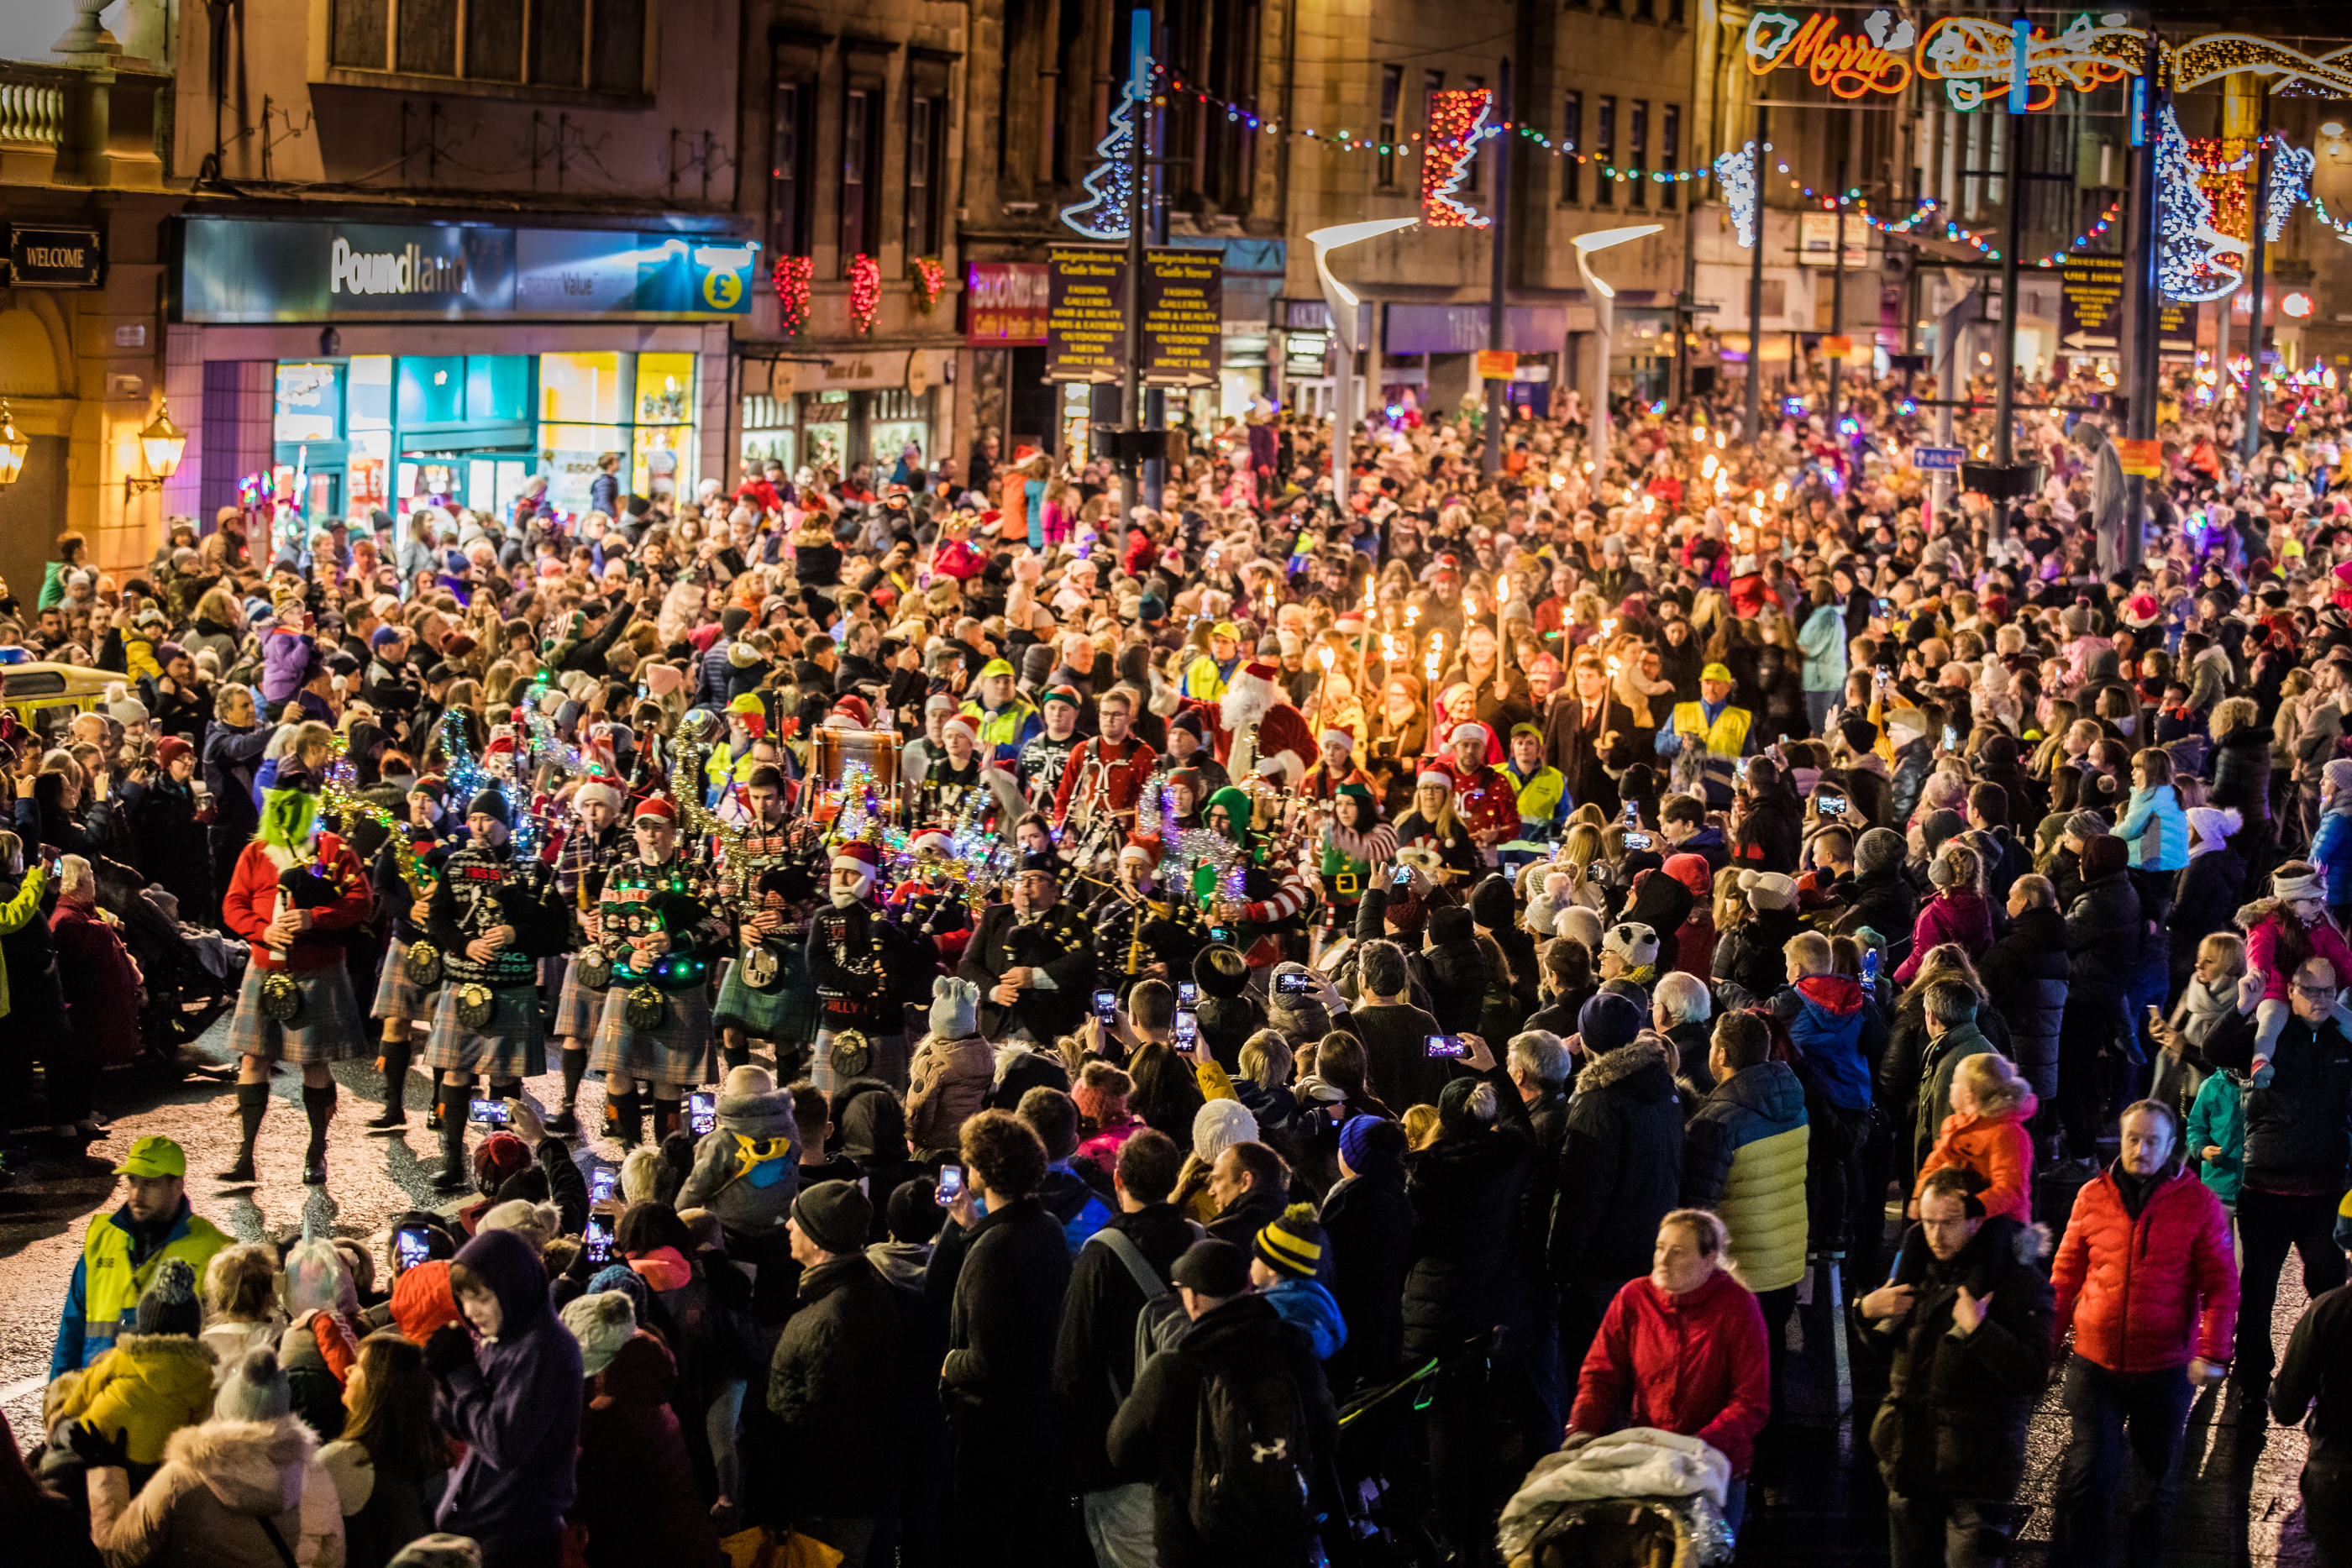 A large crowd gathered to see the Christmas lights being switched on in Inverness.